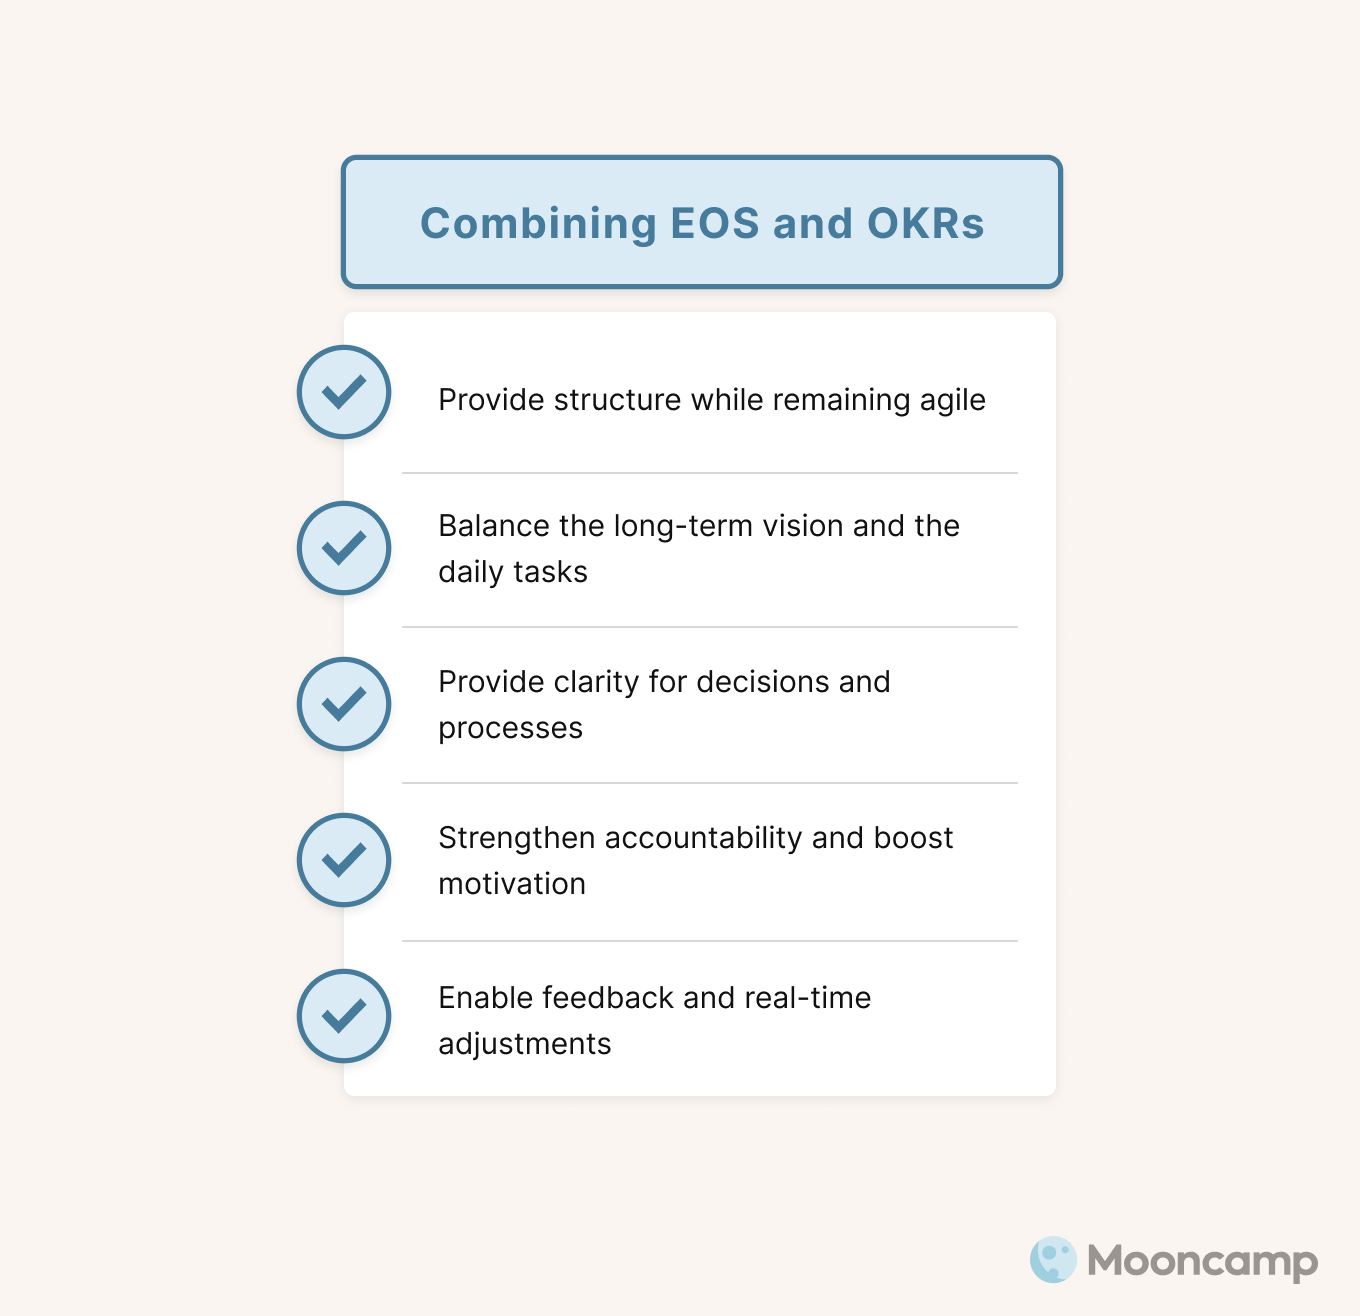 The benefits of combining EOS and OKR 